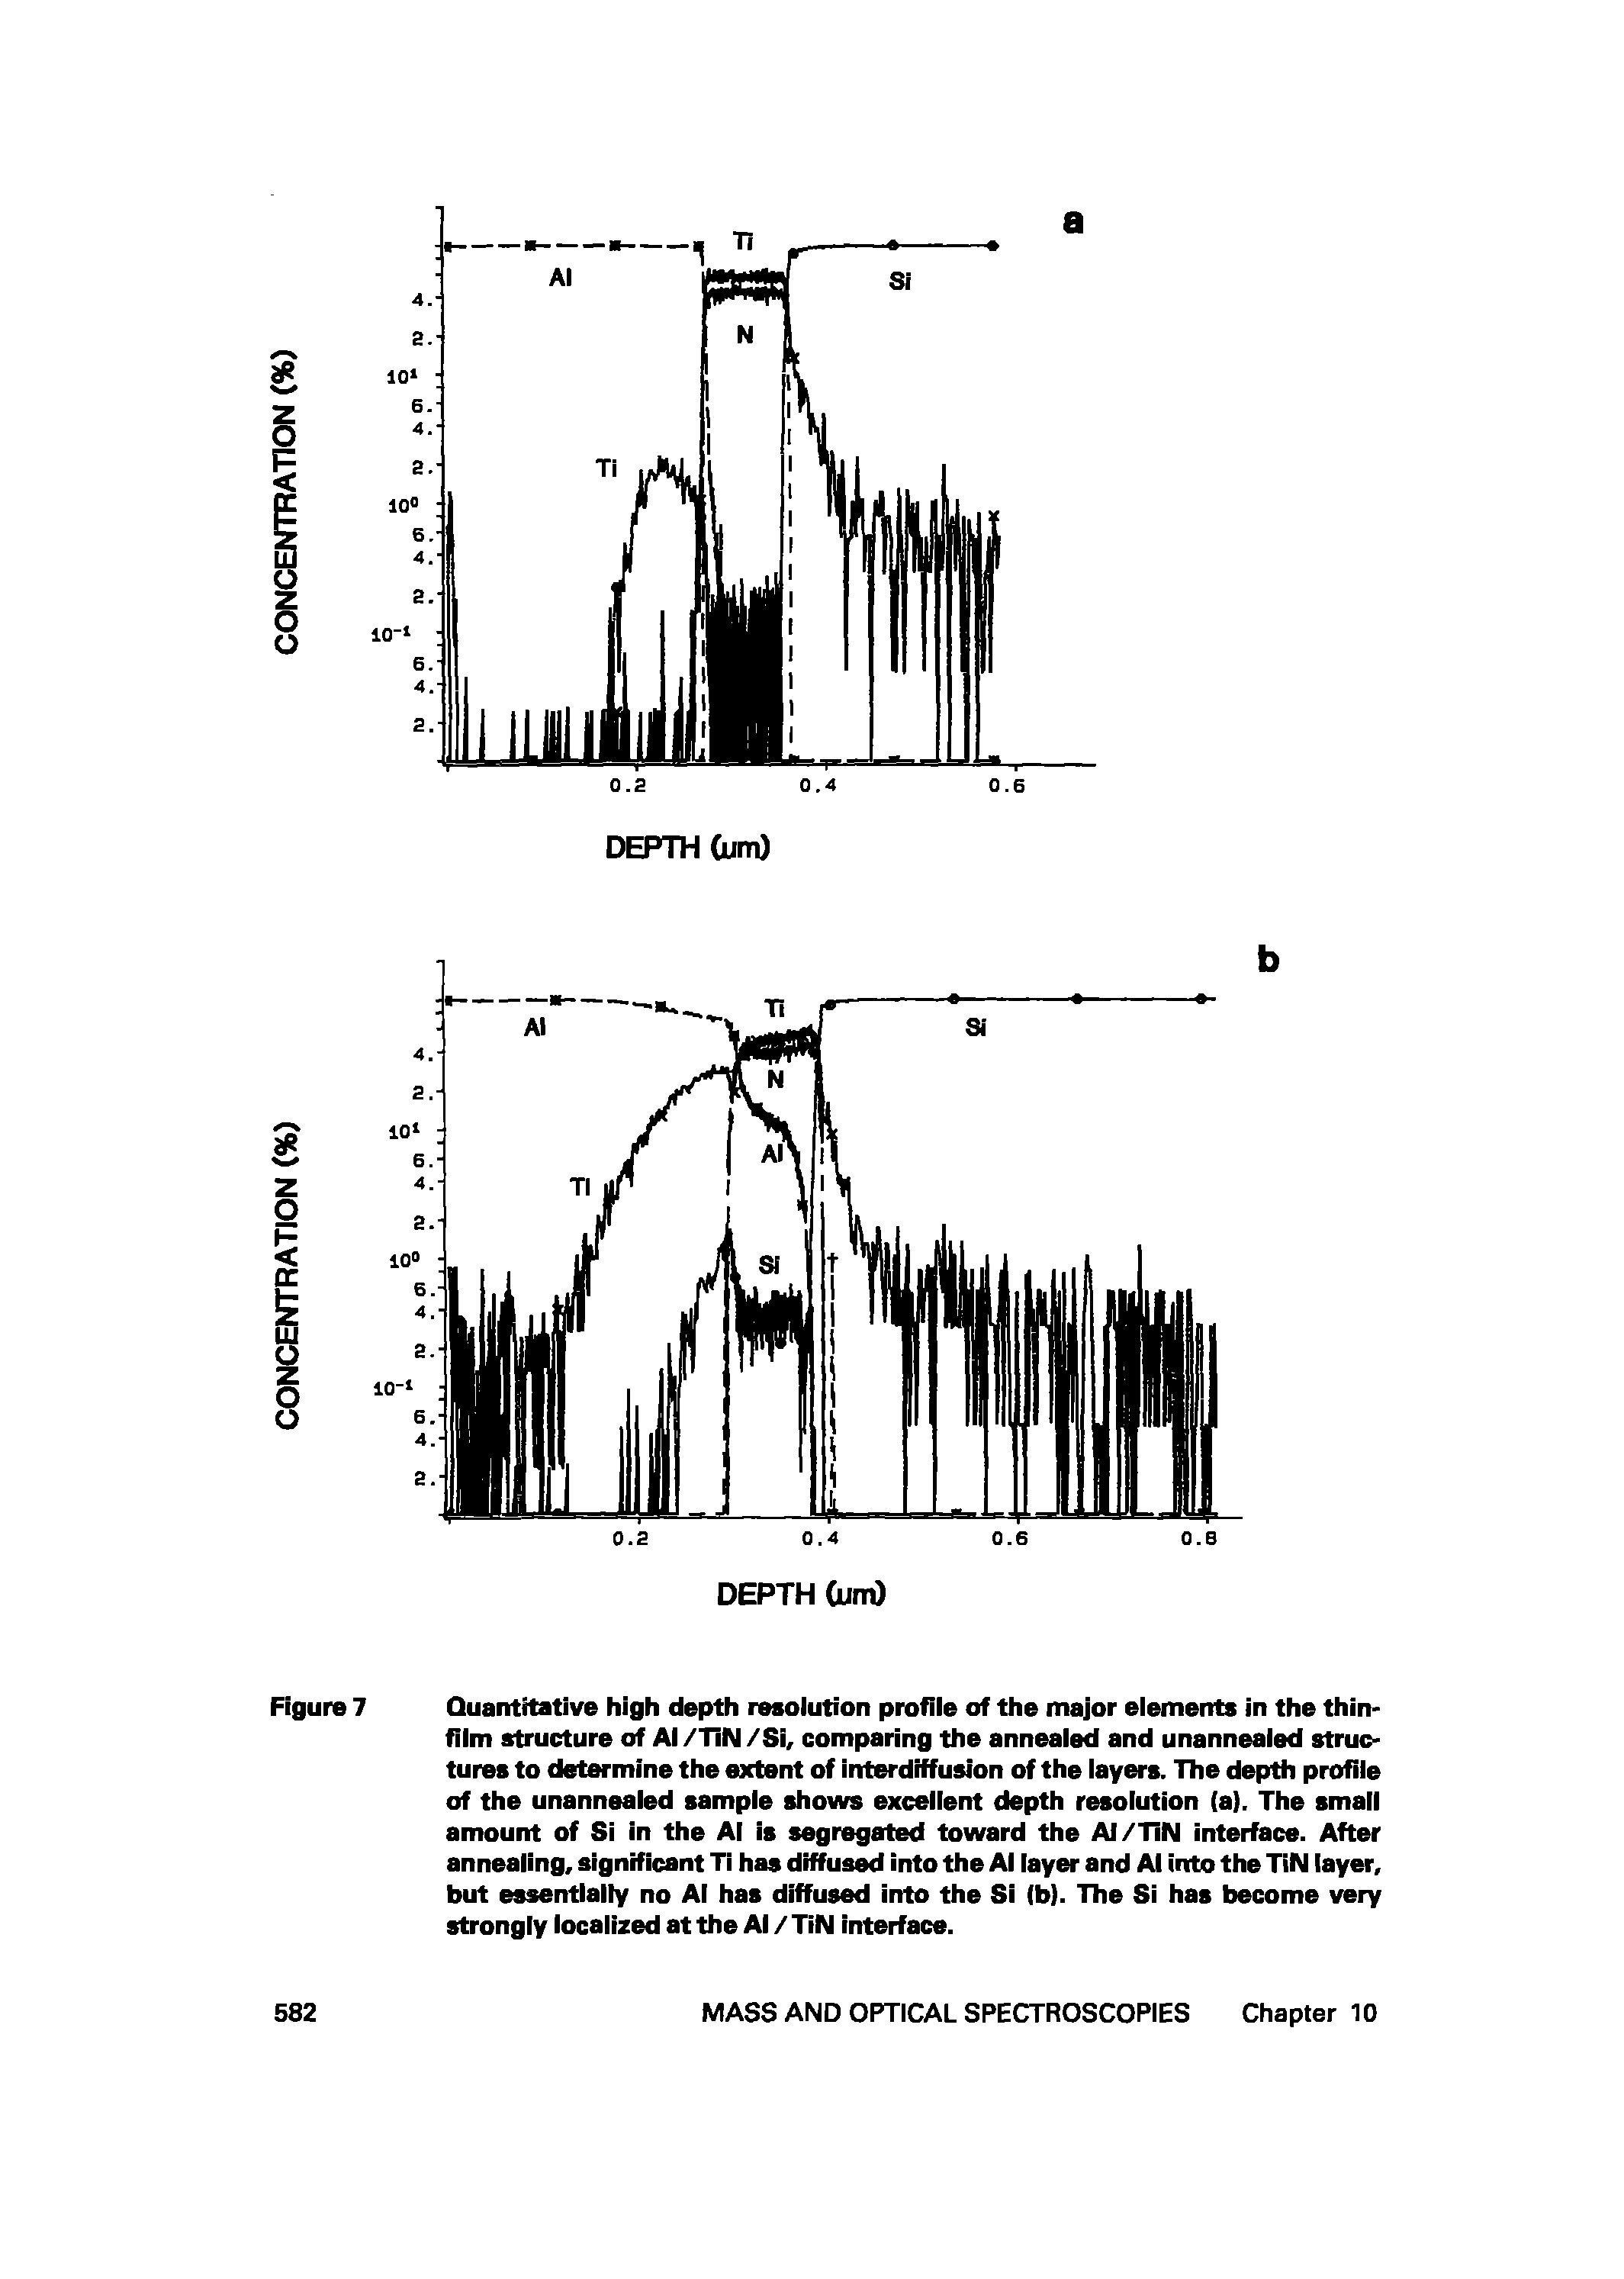 Figure 7 Quantitative high depth resolution profile of the major elements in the thin-film structure of Al /TIN /Si, comparing the annealed and unannealad structures to determine the extent of interdiffusion of the layers. The depth profile of the unannealed sample shows excellent depth resolution (a). The small amount of Si in the Al is segregated toward the Al/TiN interface. After annealing, significant Ti has diffused into the Al layer and Al into the TIN layer, but essentially no Al has diffused into the Si (b). The Si has become very strongly localized at the Al / TIN interface.